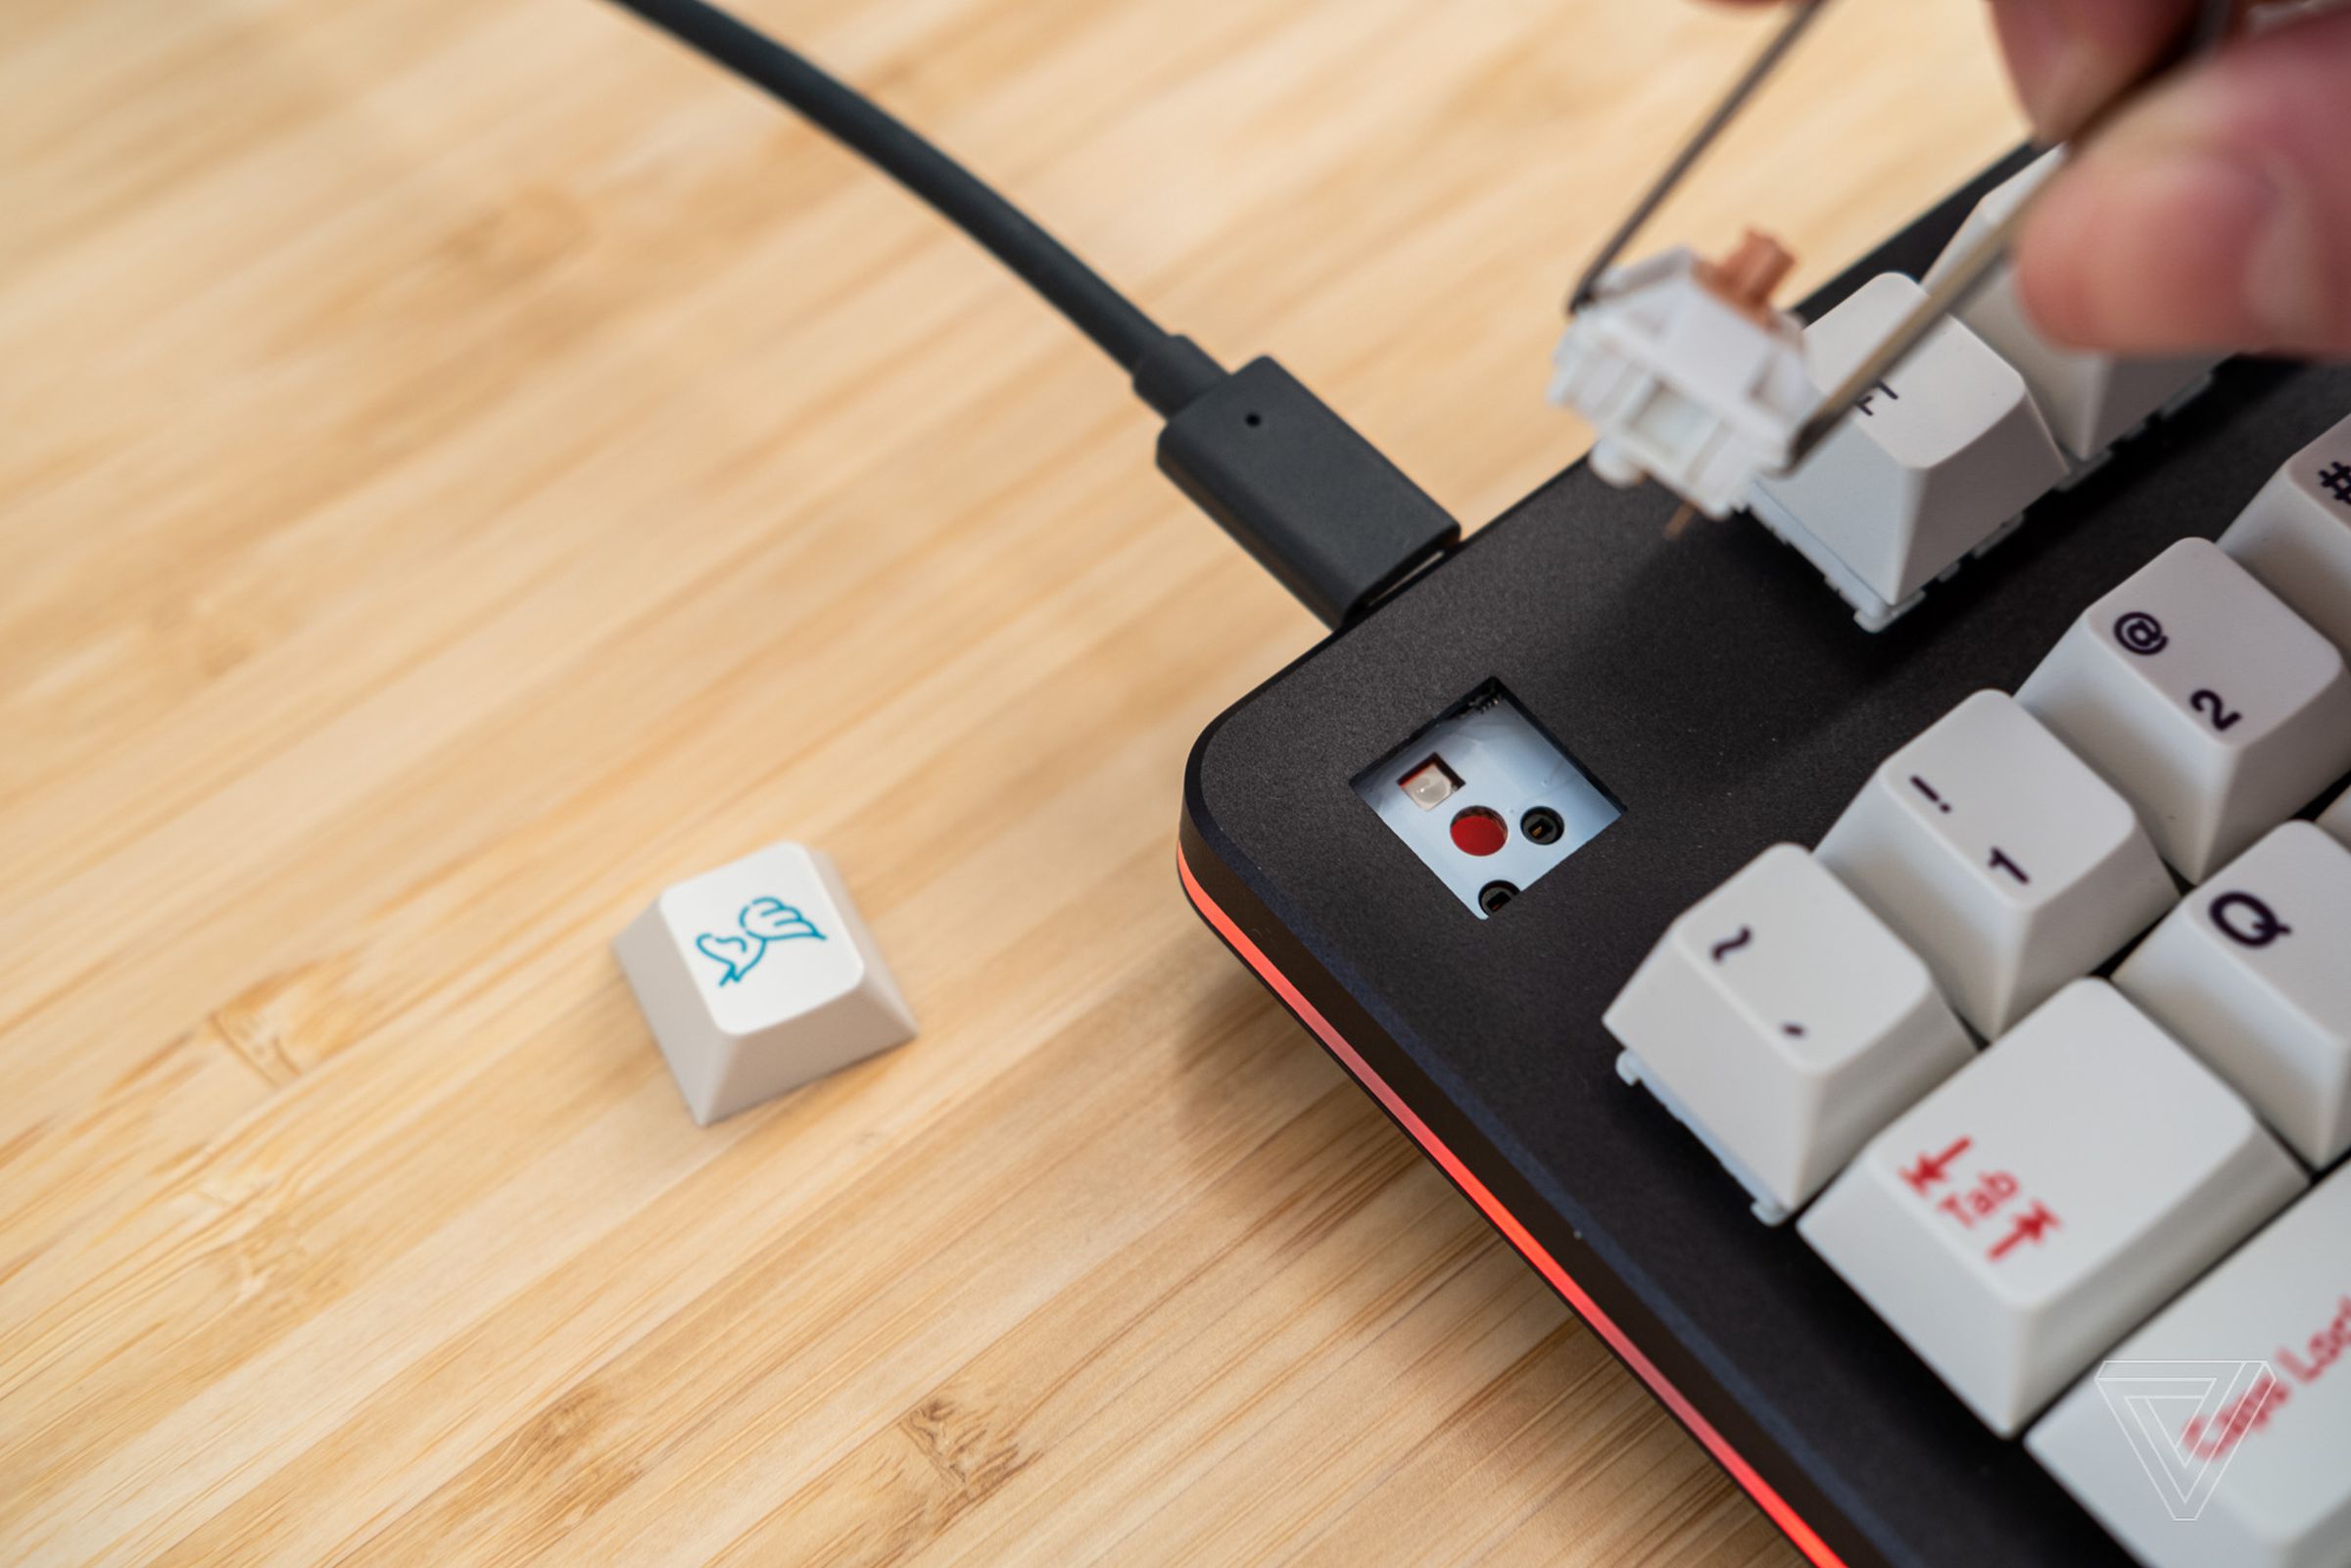 The Mythic Journey’s hot-swappable board only supports 3-pin switches, limiting compatibility